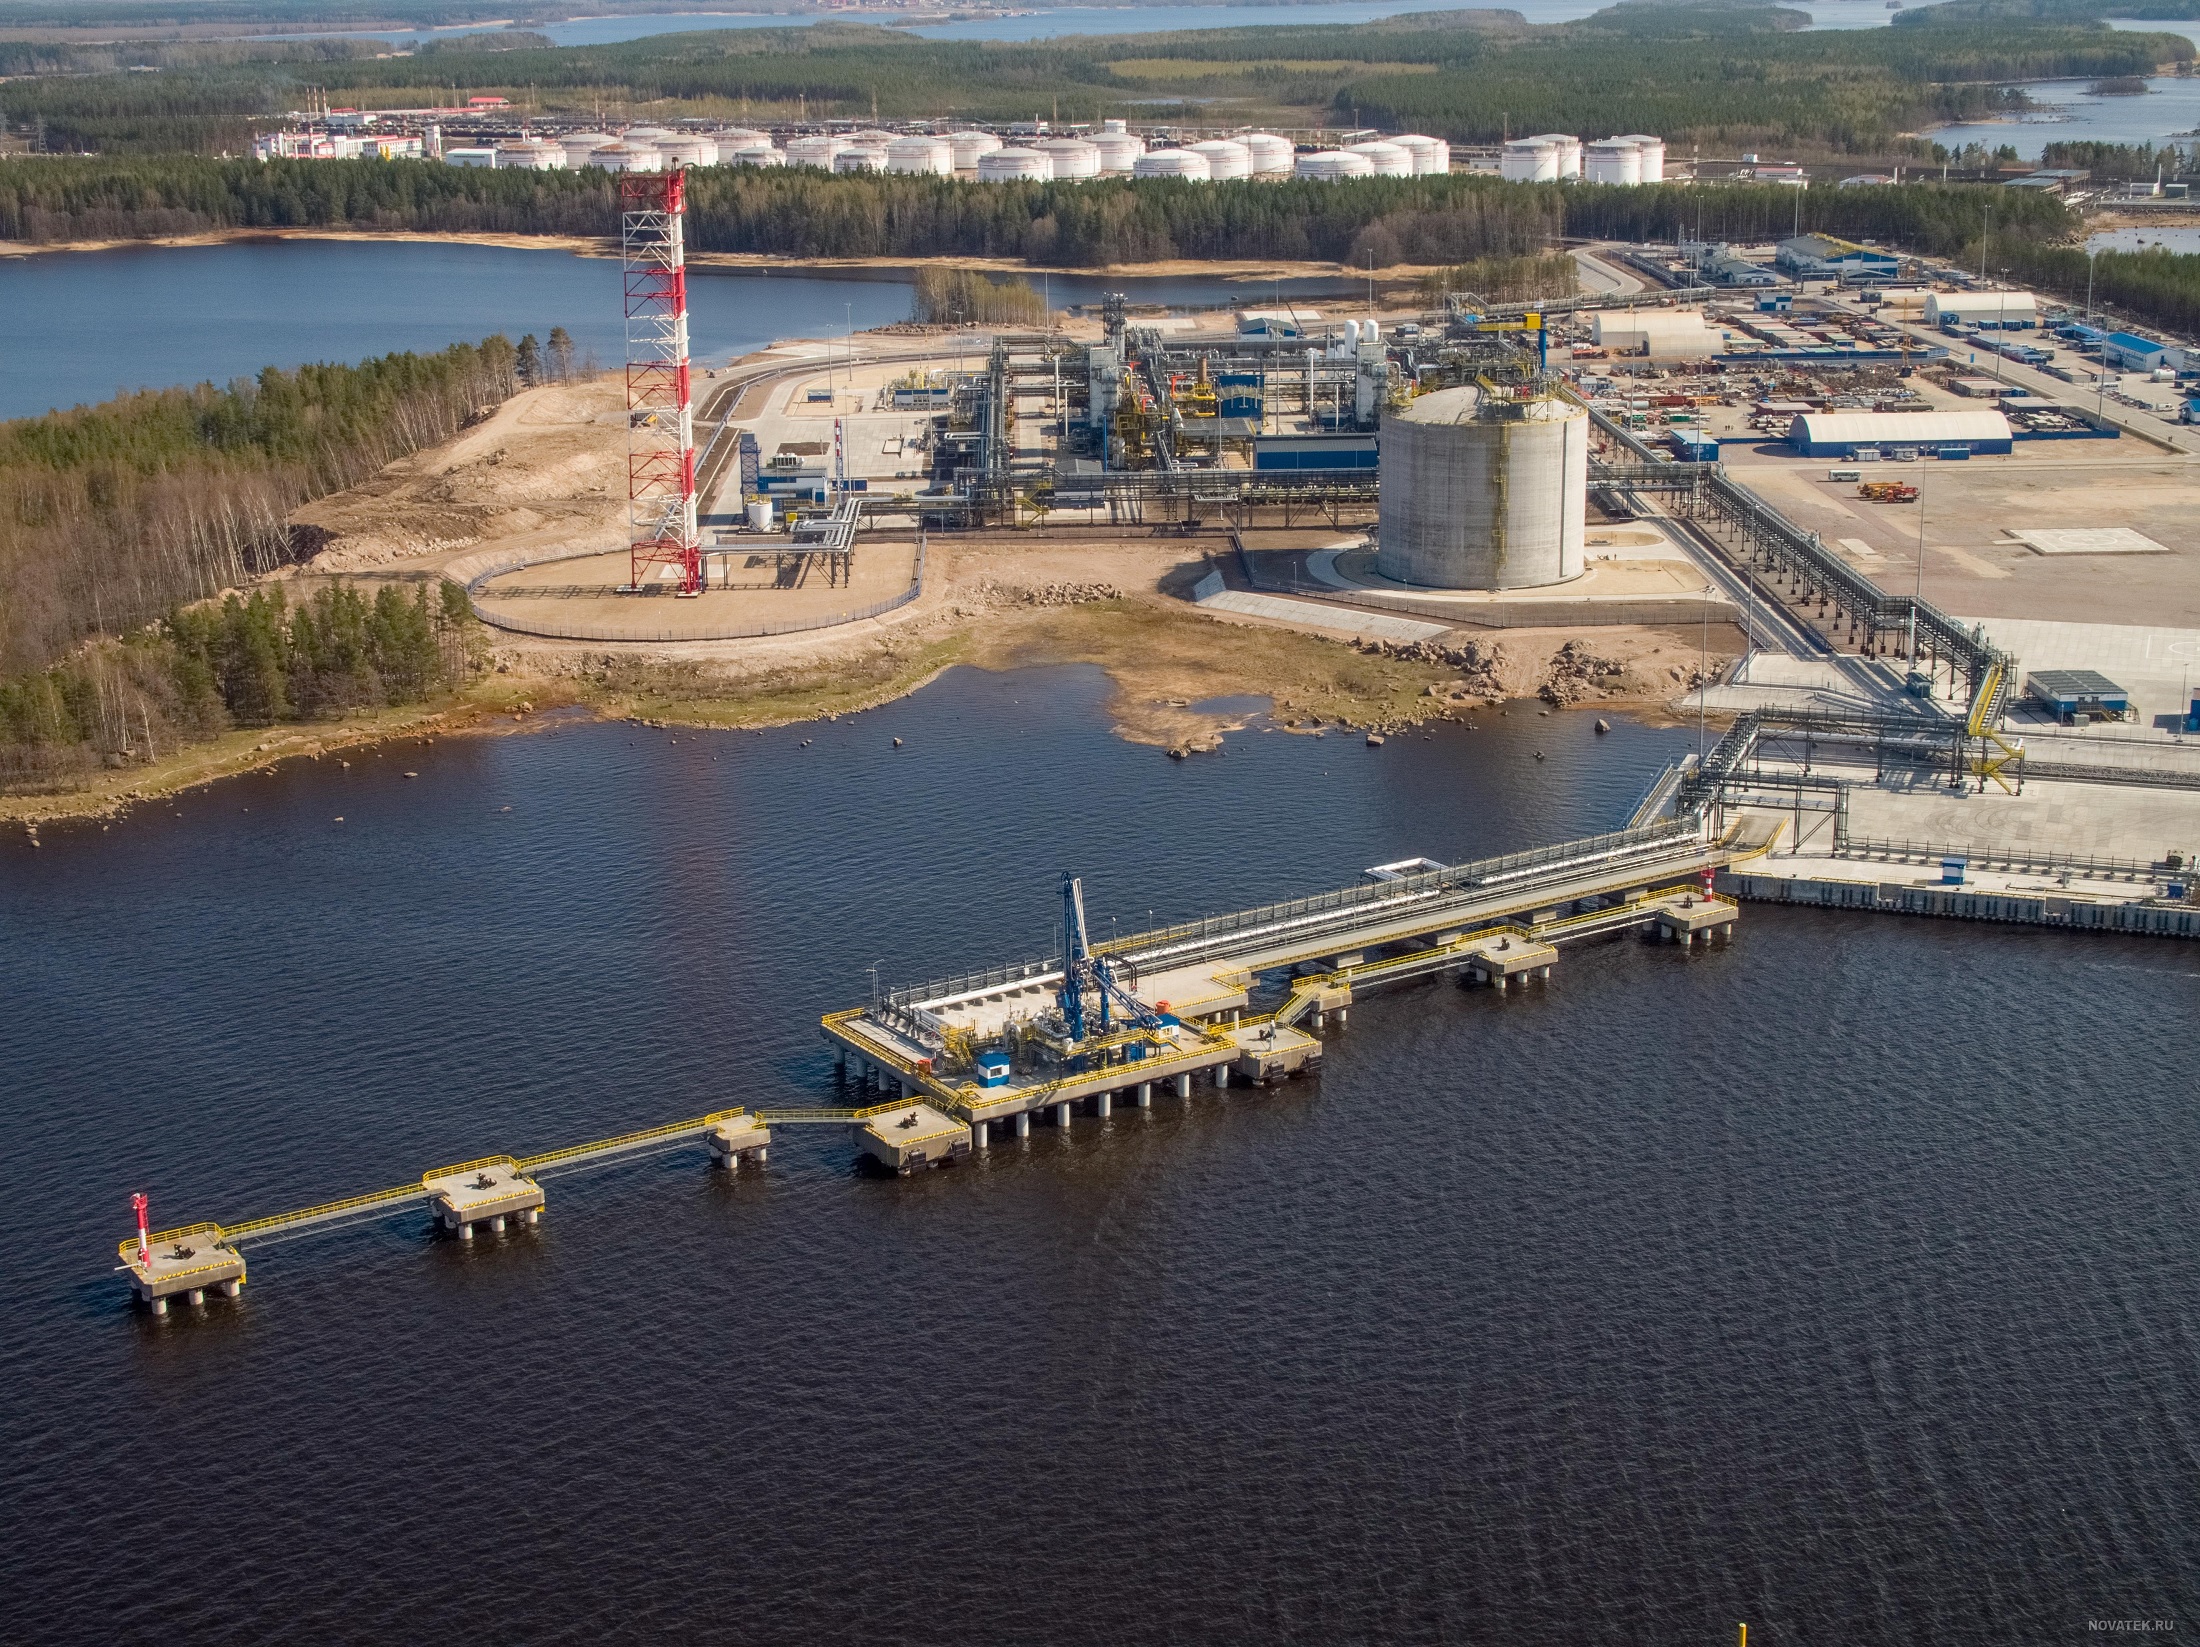 Novatek and Fortum join in on renewable power